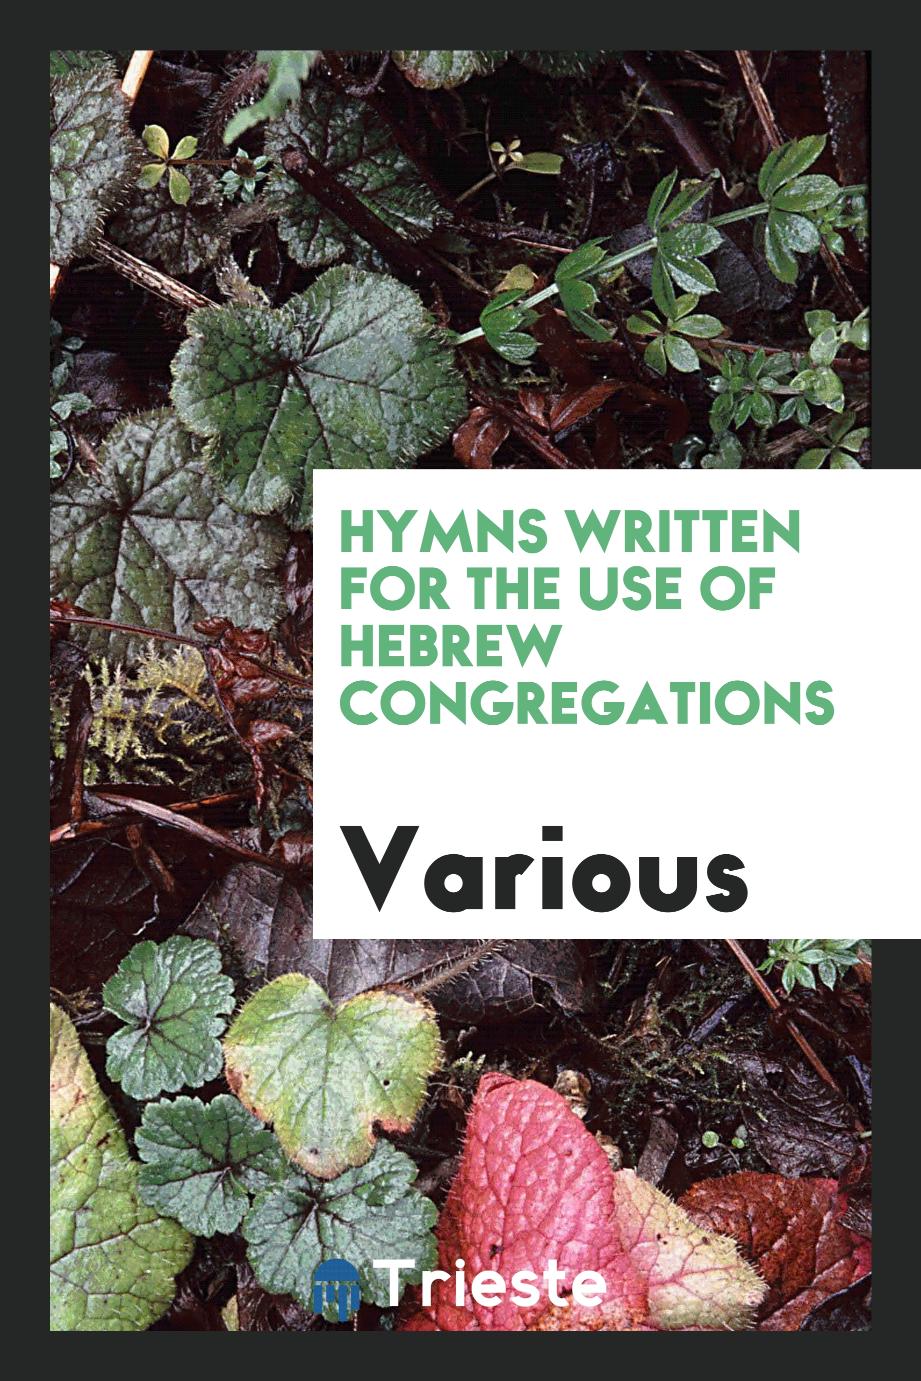 Hymns written for the use of Hebrew Congregations